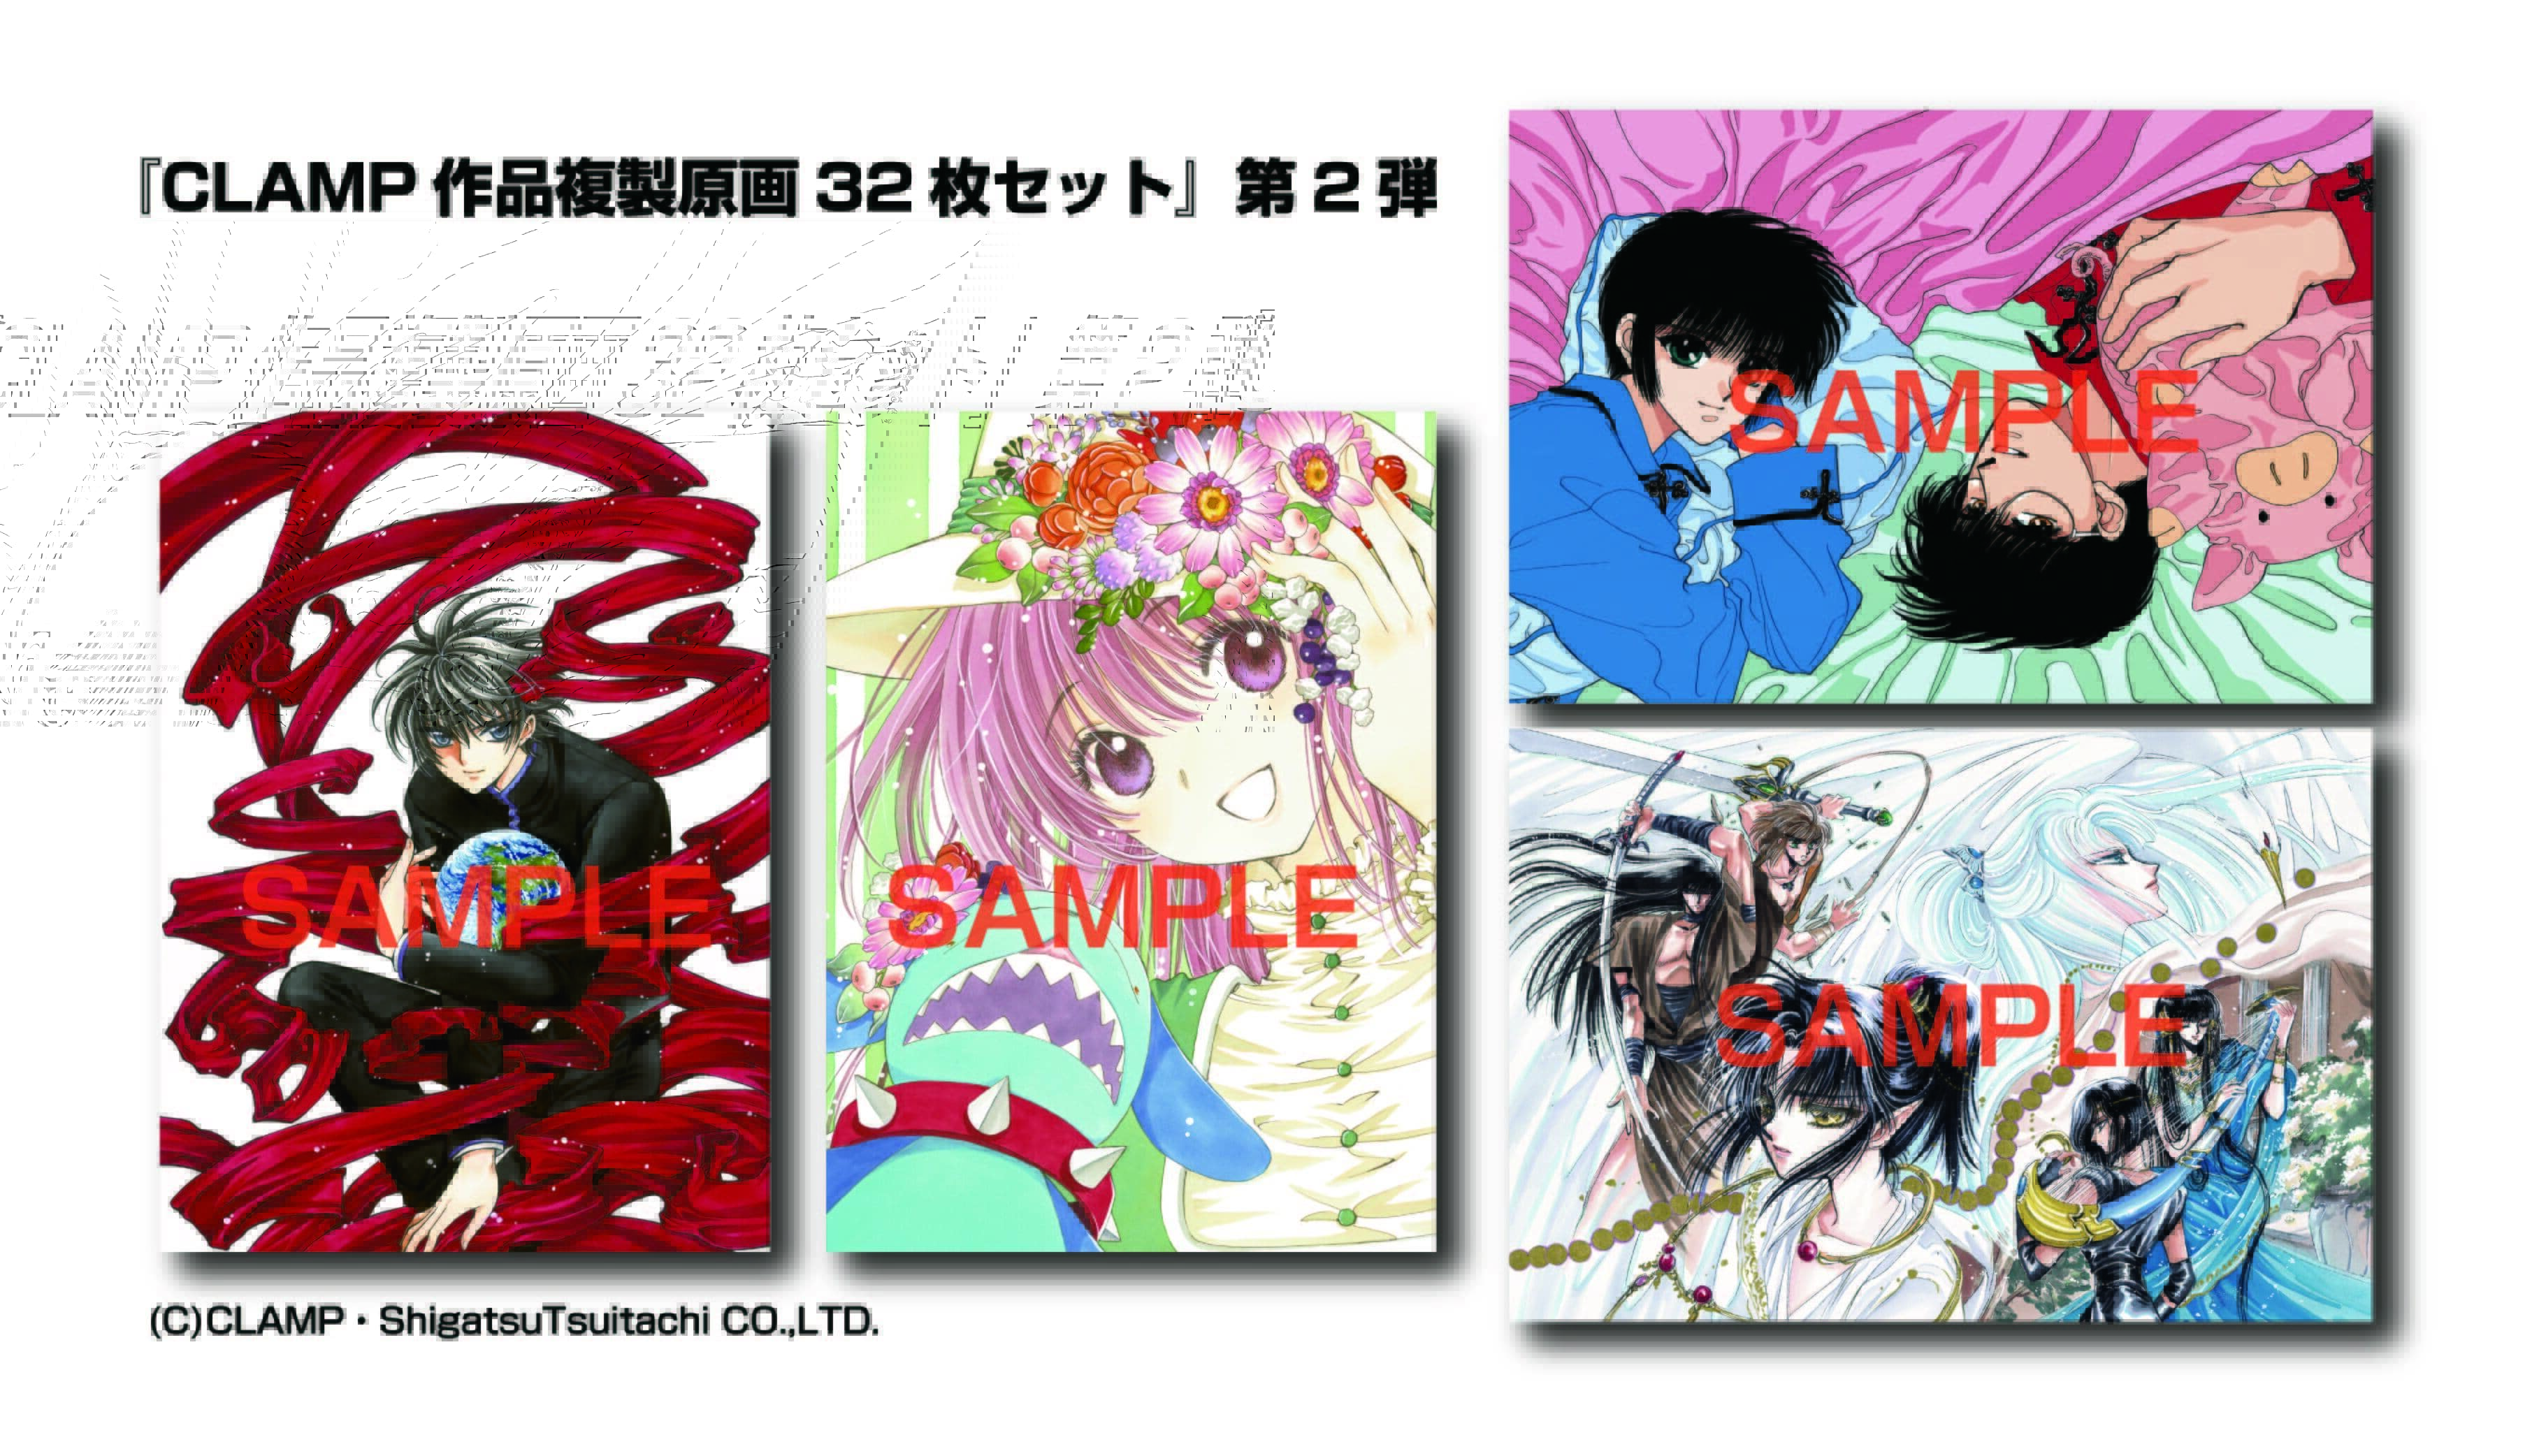 Ryokotomo - a963d643 manga group clamp to release clamp premium collection vol 2